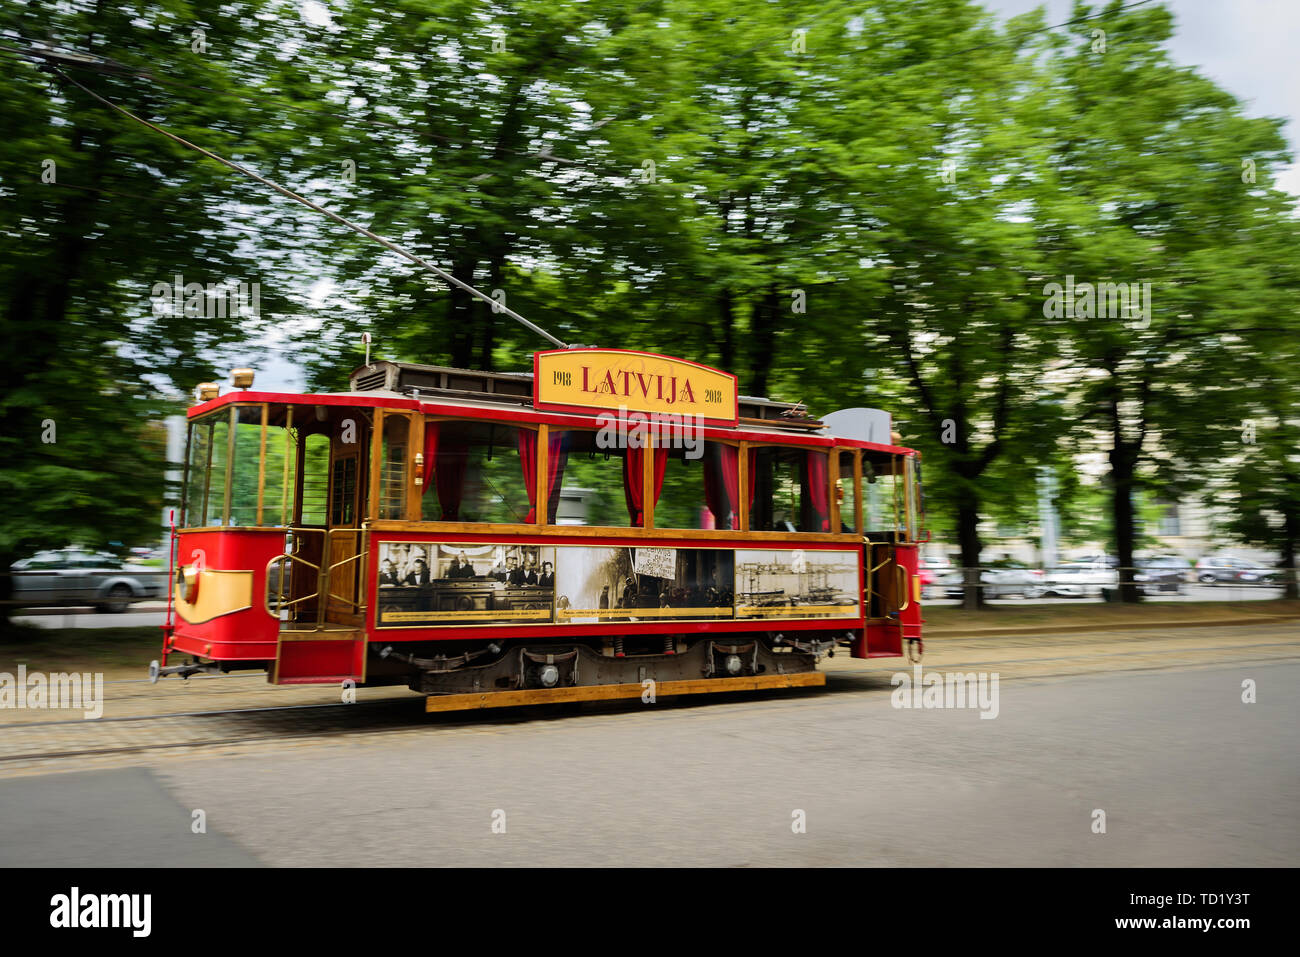 Riga, Latvia - May 25, 2019: Old historical tram on street of Riga. In motion, selective focus Stock Photo